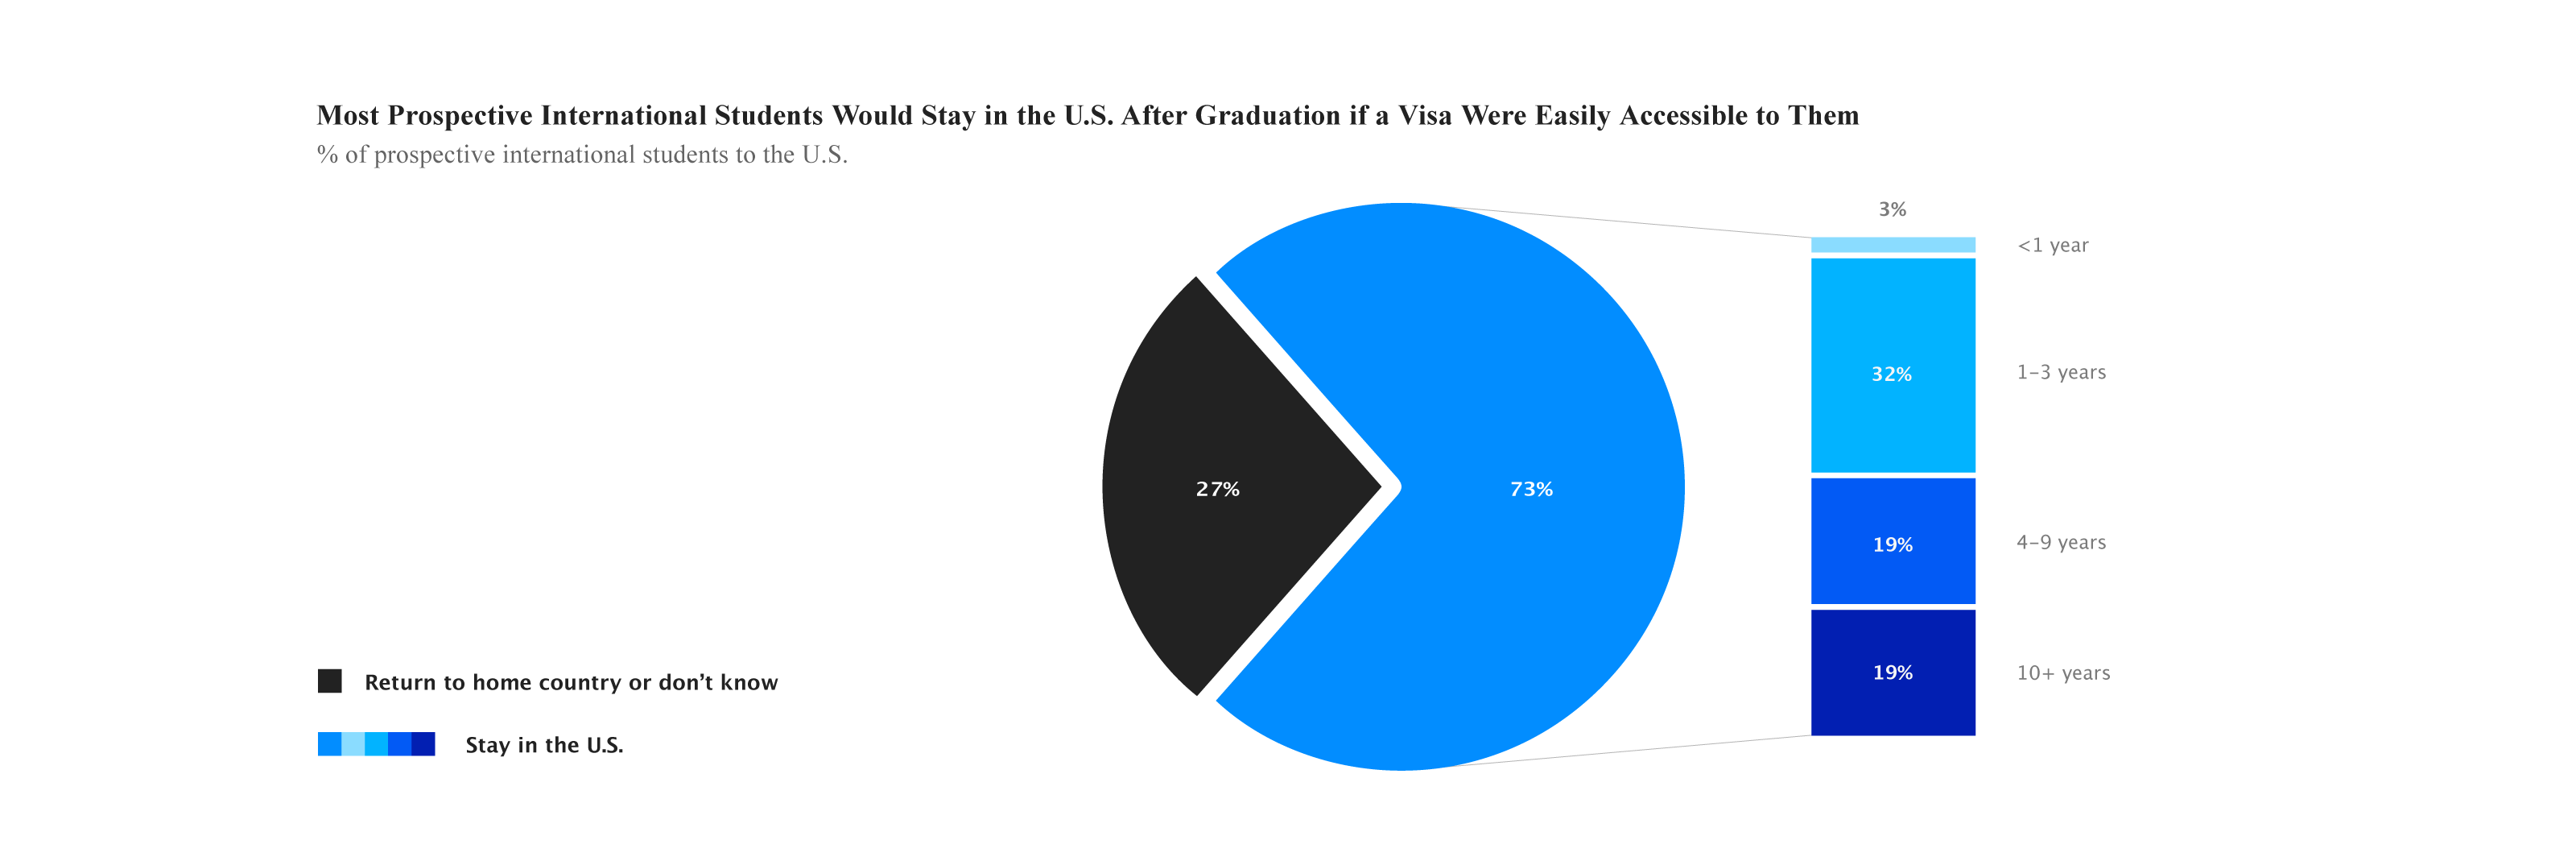 Pie chart titled "most prospective international students would stay in the U.S. after graduation if a visa were easily accessible to them." 73% of prospective international students to the U.S. would stay in the U.S. Within this 73%, 19% said they would live and work in the U.S for over 10 years, 19% for 4 to 9 years, 32% 1 to 3 years, and 3% for less than a year. While 27% said they would return to home country or don't know.